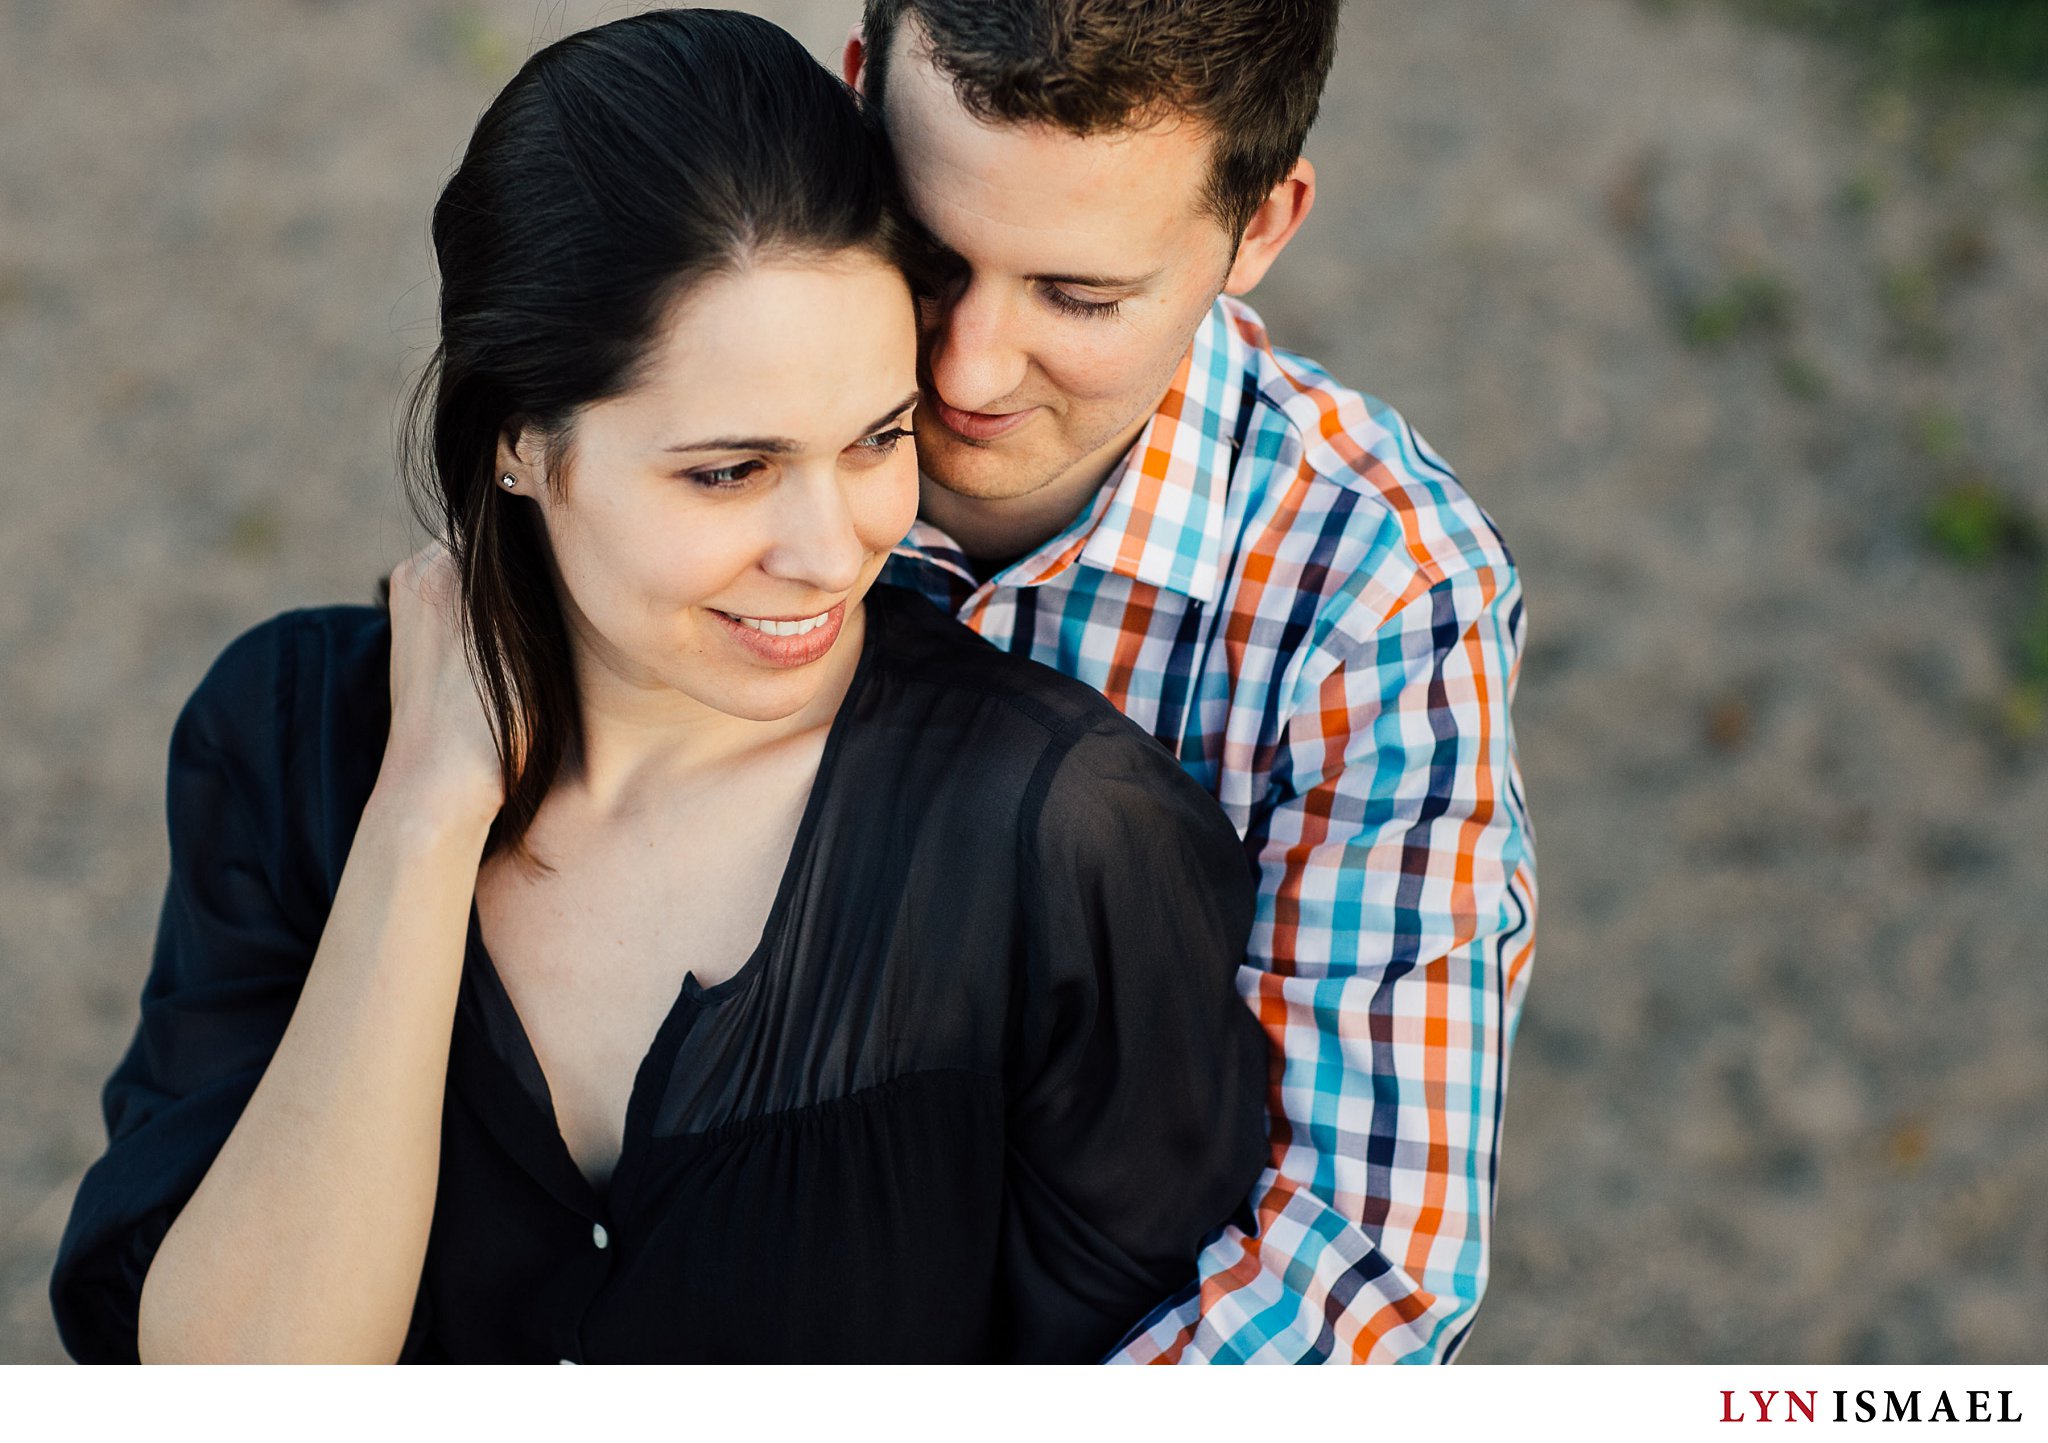 Image of an engaged couple taken during their engagement session.